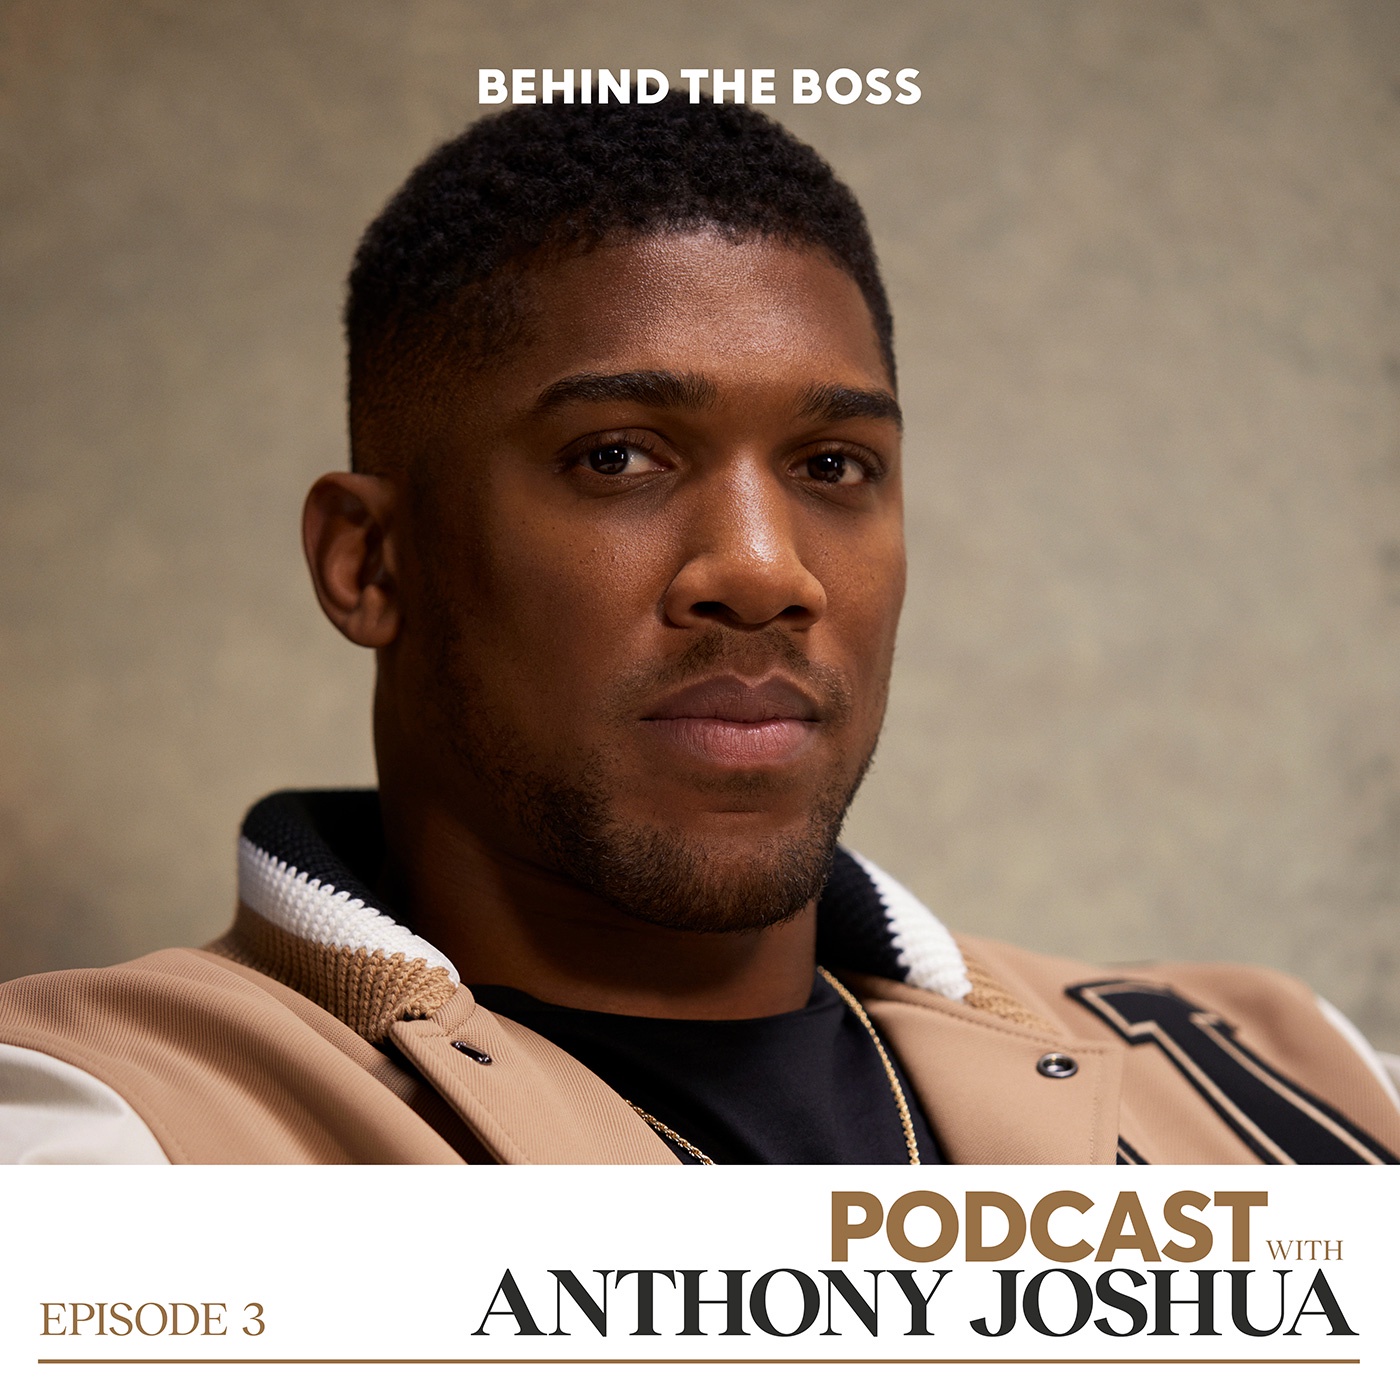 Behind the BOSS with Anthony Joshua